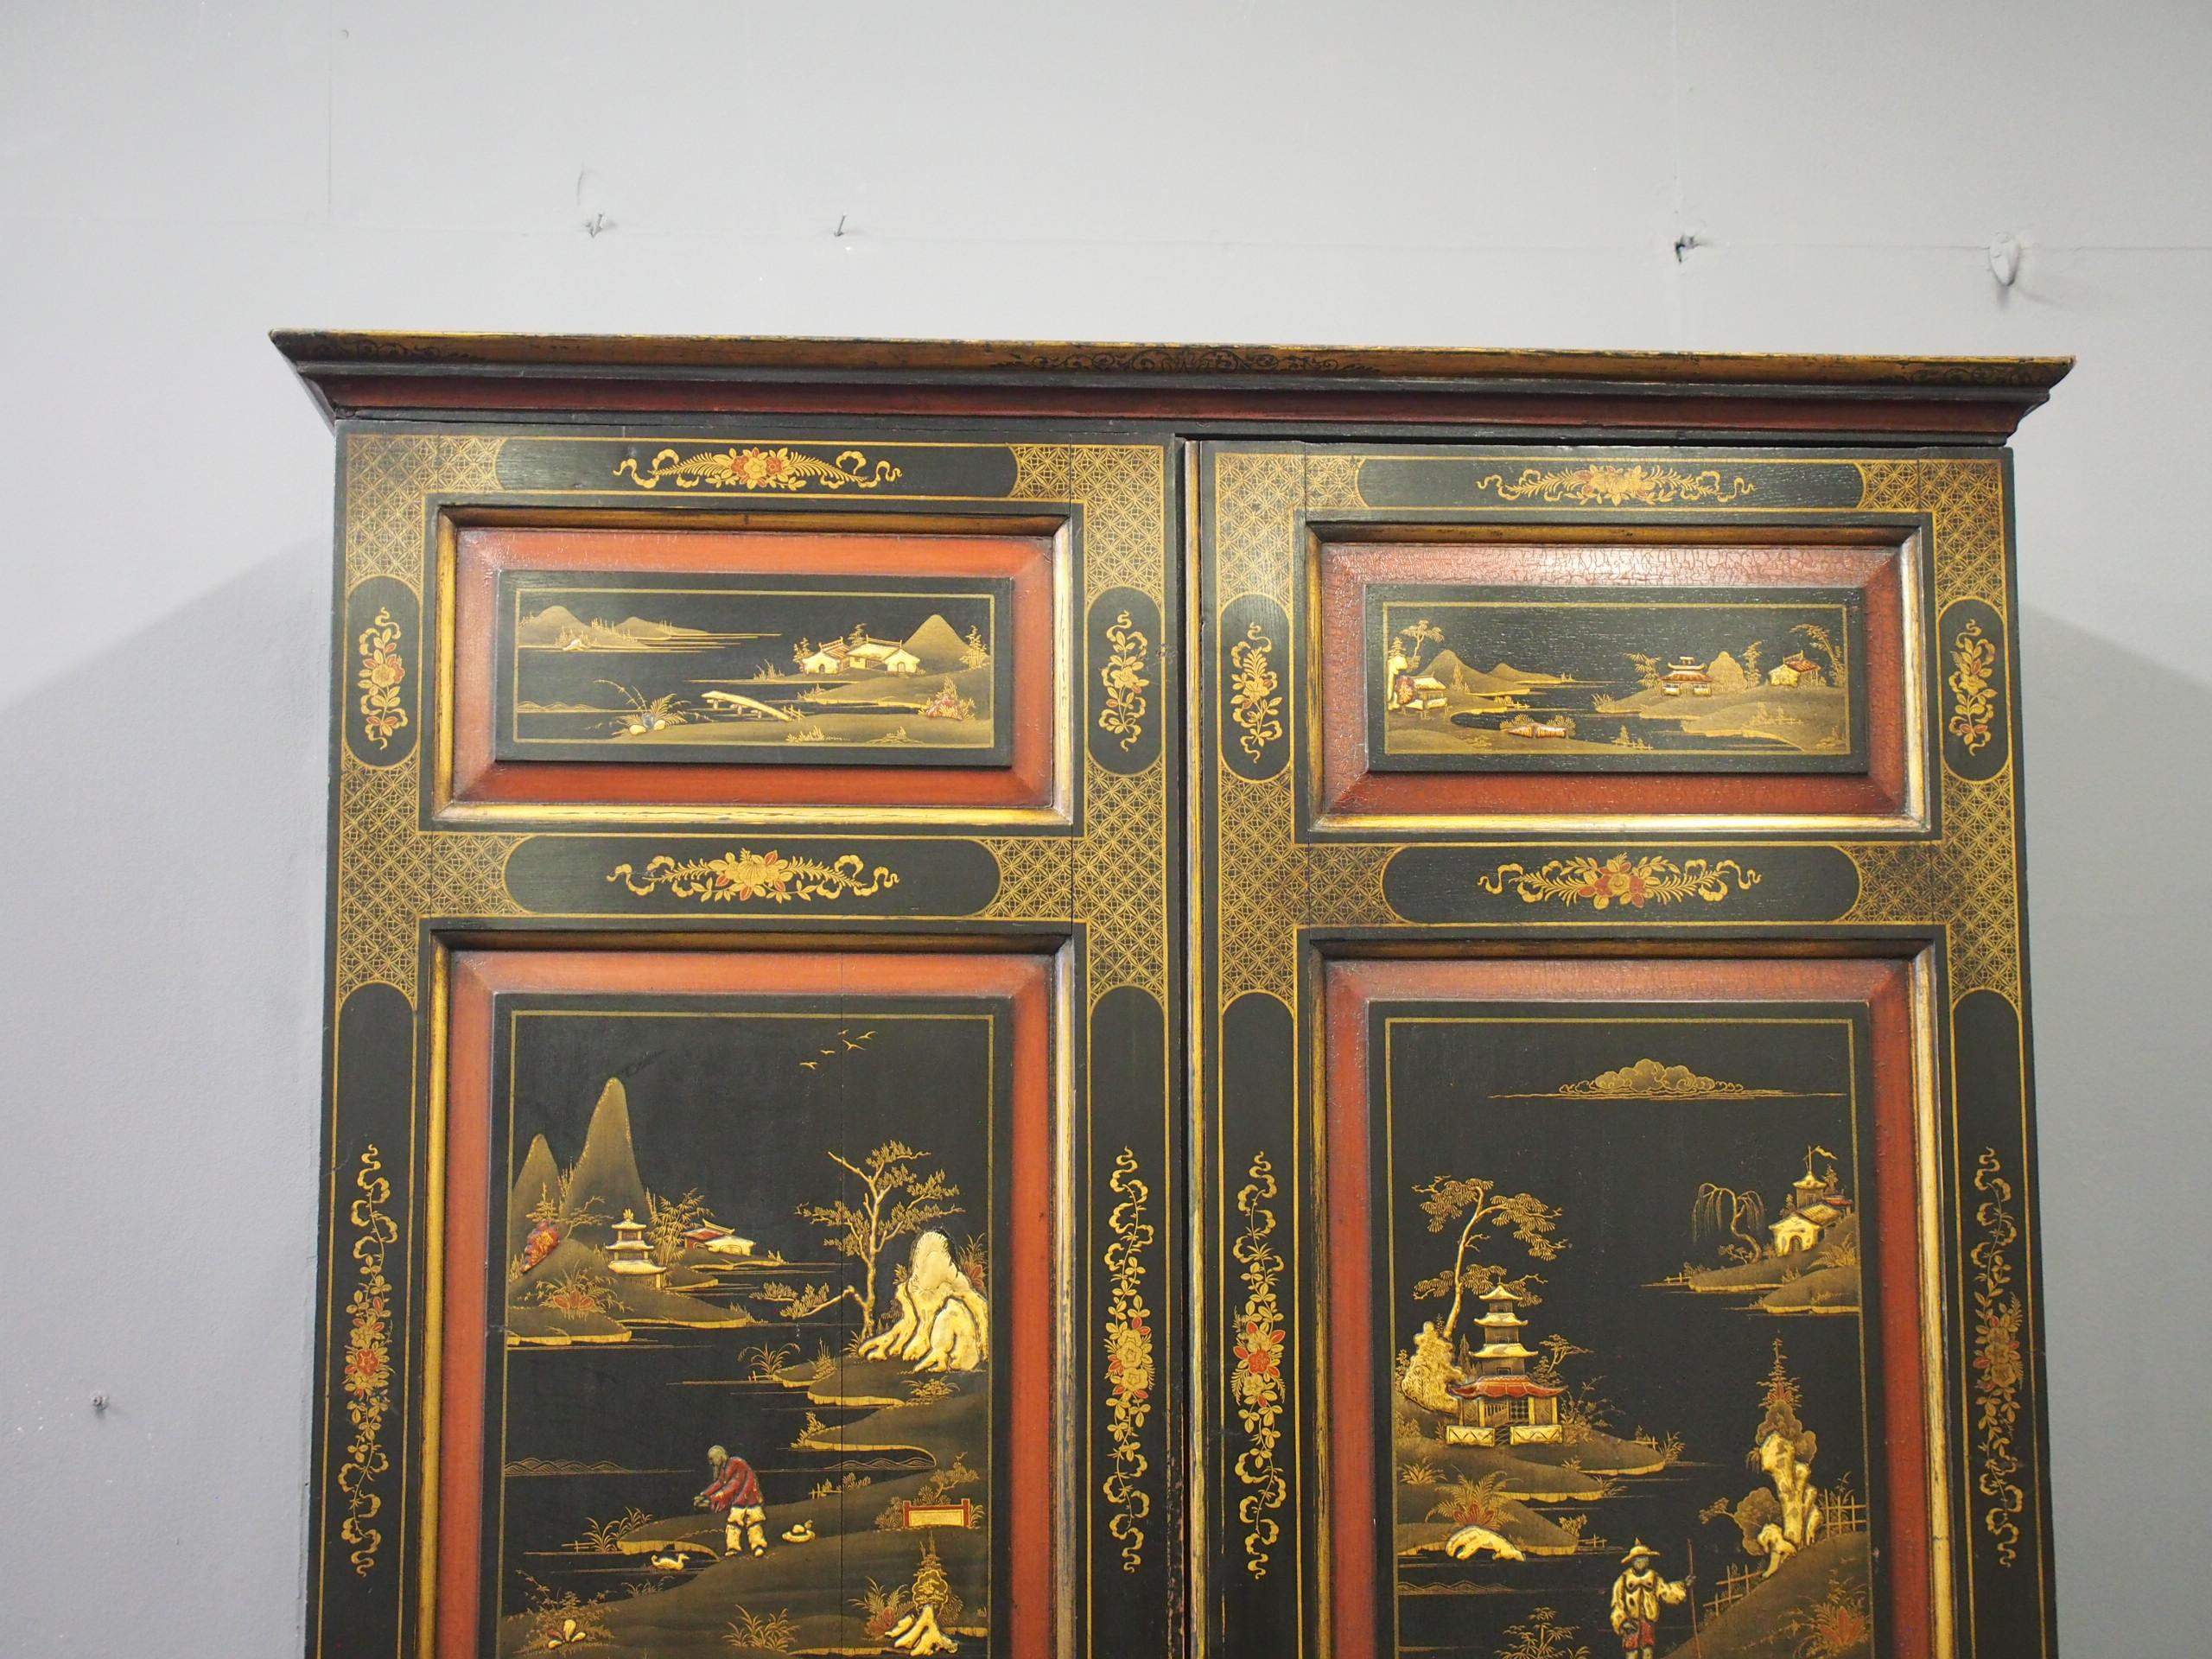 Georgian style chinoiserie 2-door wardrobe, circa 1880. Painted and lacquered, with a moulded cornice and gilding with Chinese motifs to the 6 fielded panels in the 2 full length doors. The painted designs continue to the gables, and inside it has 2